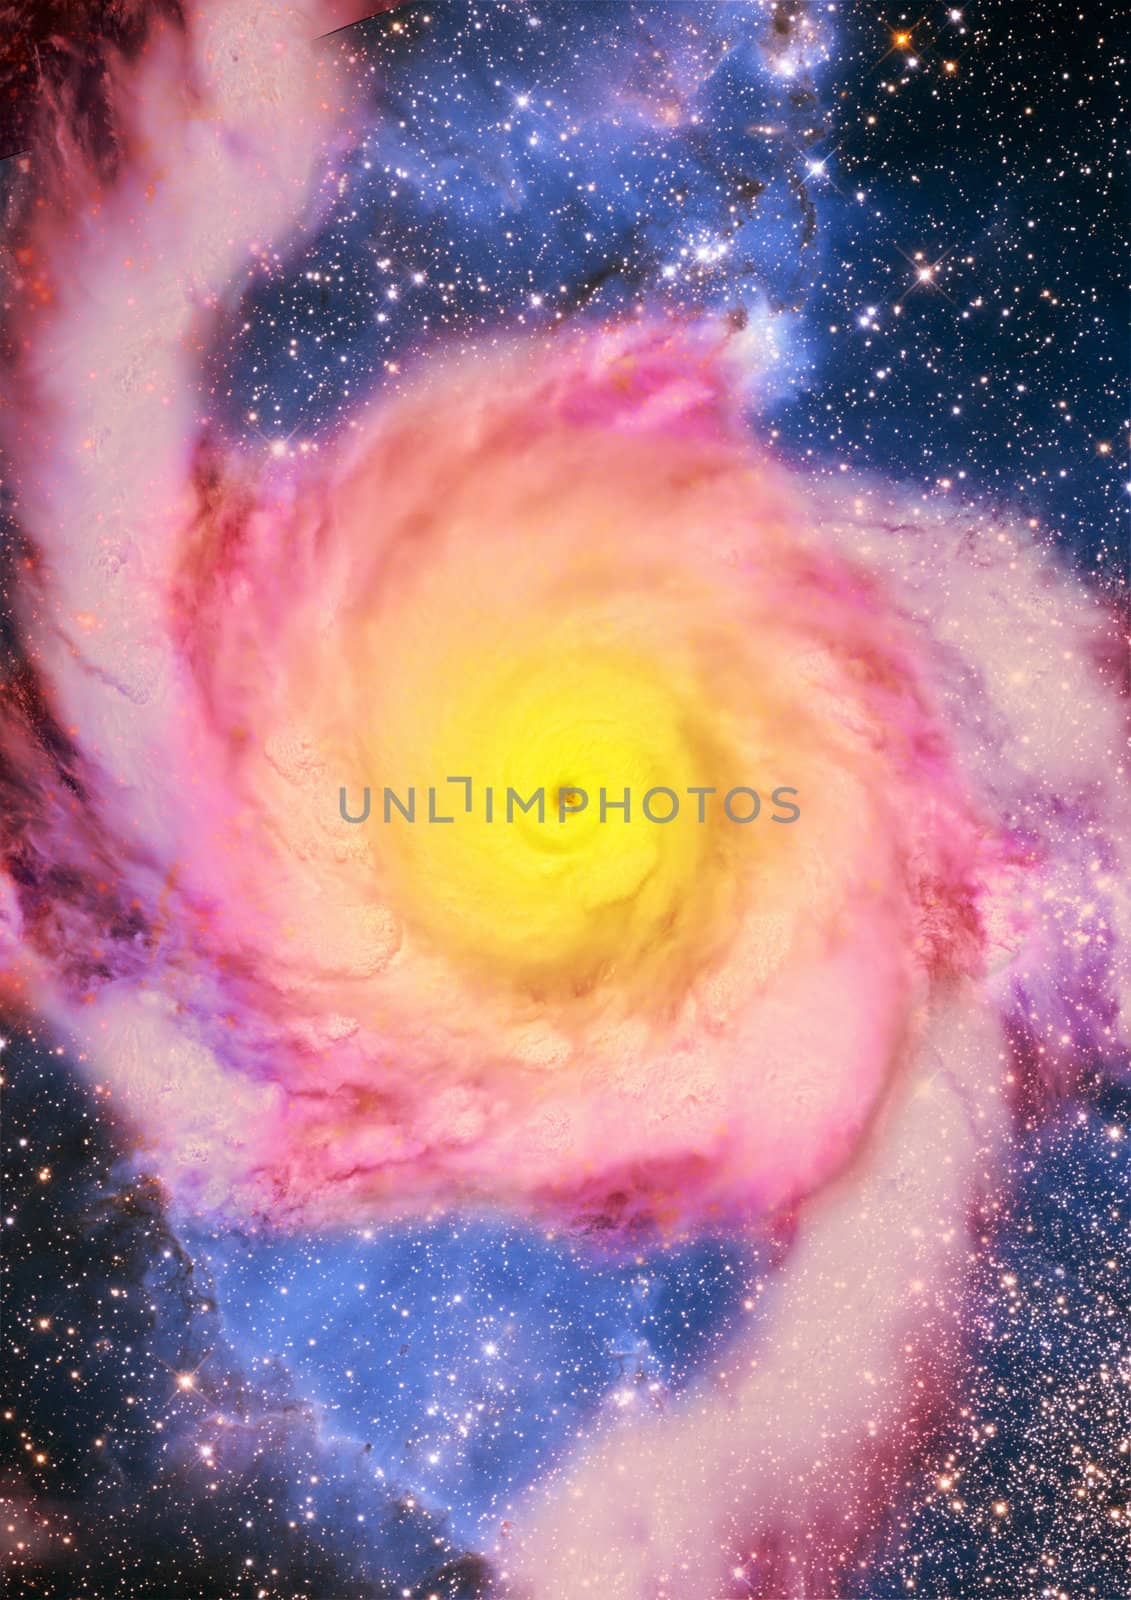 Stars and spiral galaxy in a free space